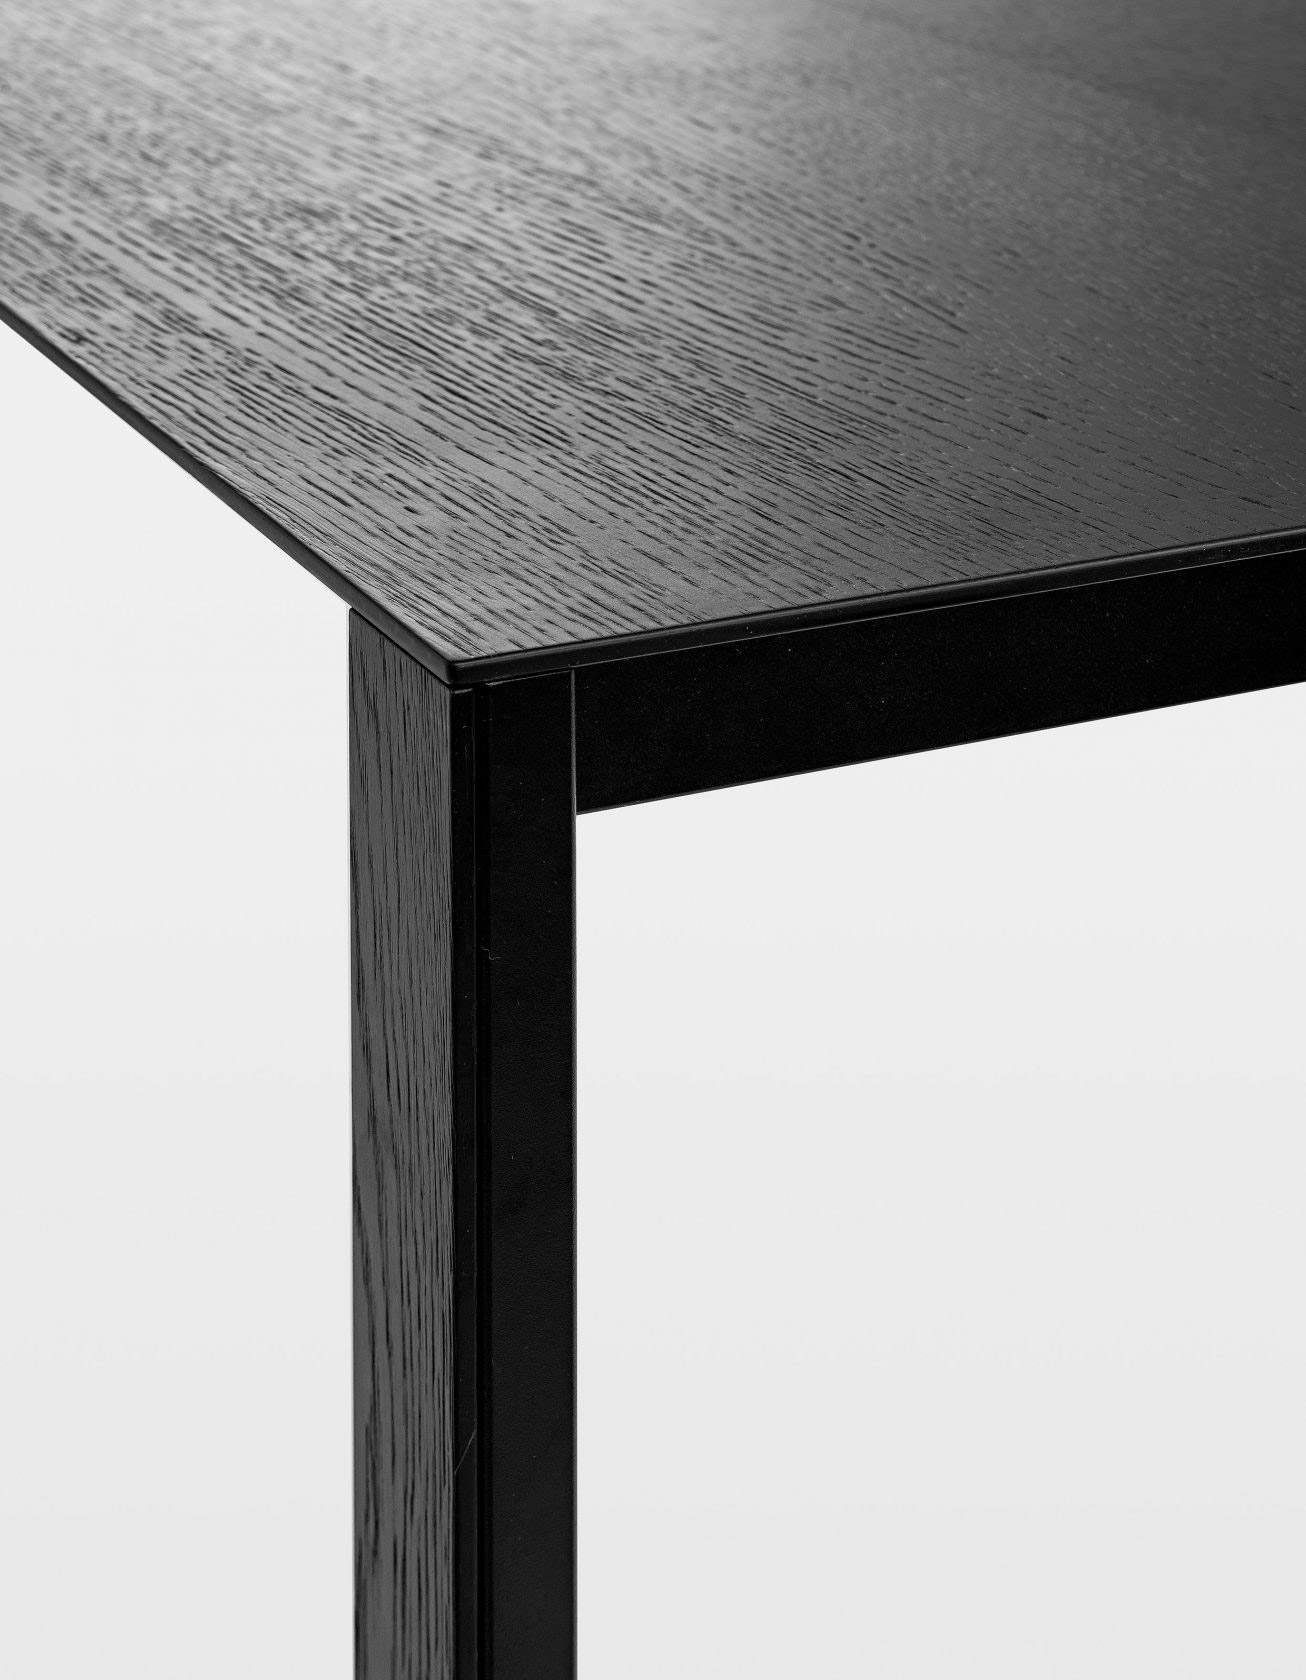 Thin-K Table by Luciano Bertoncini in Black